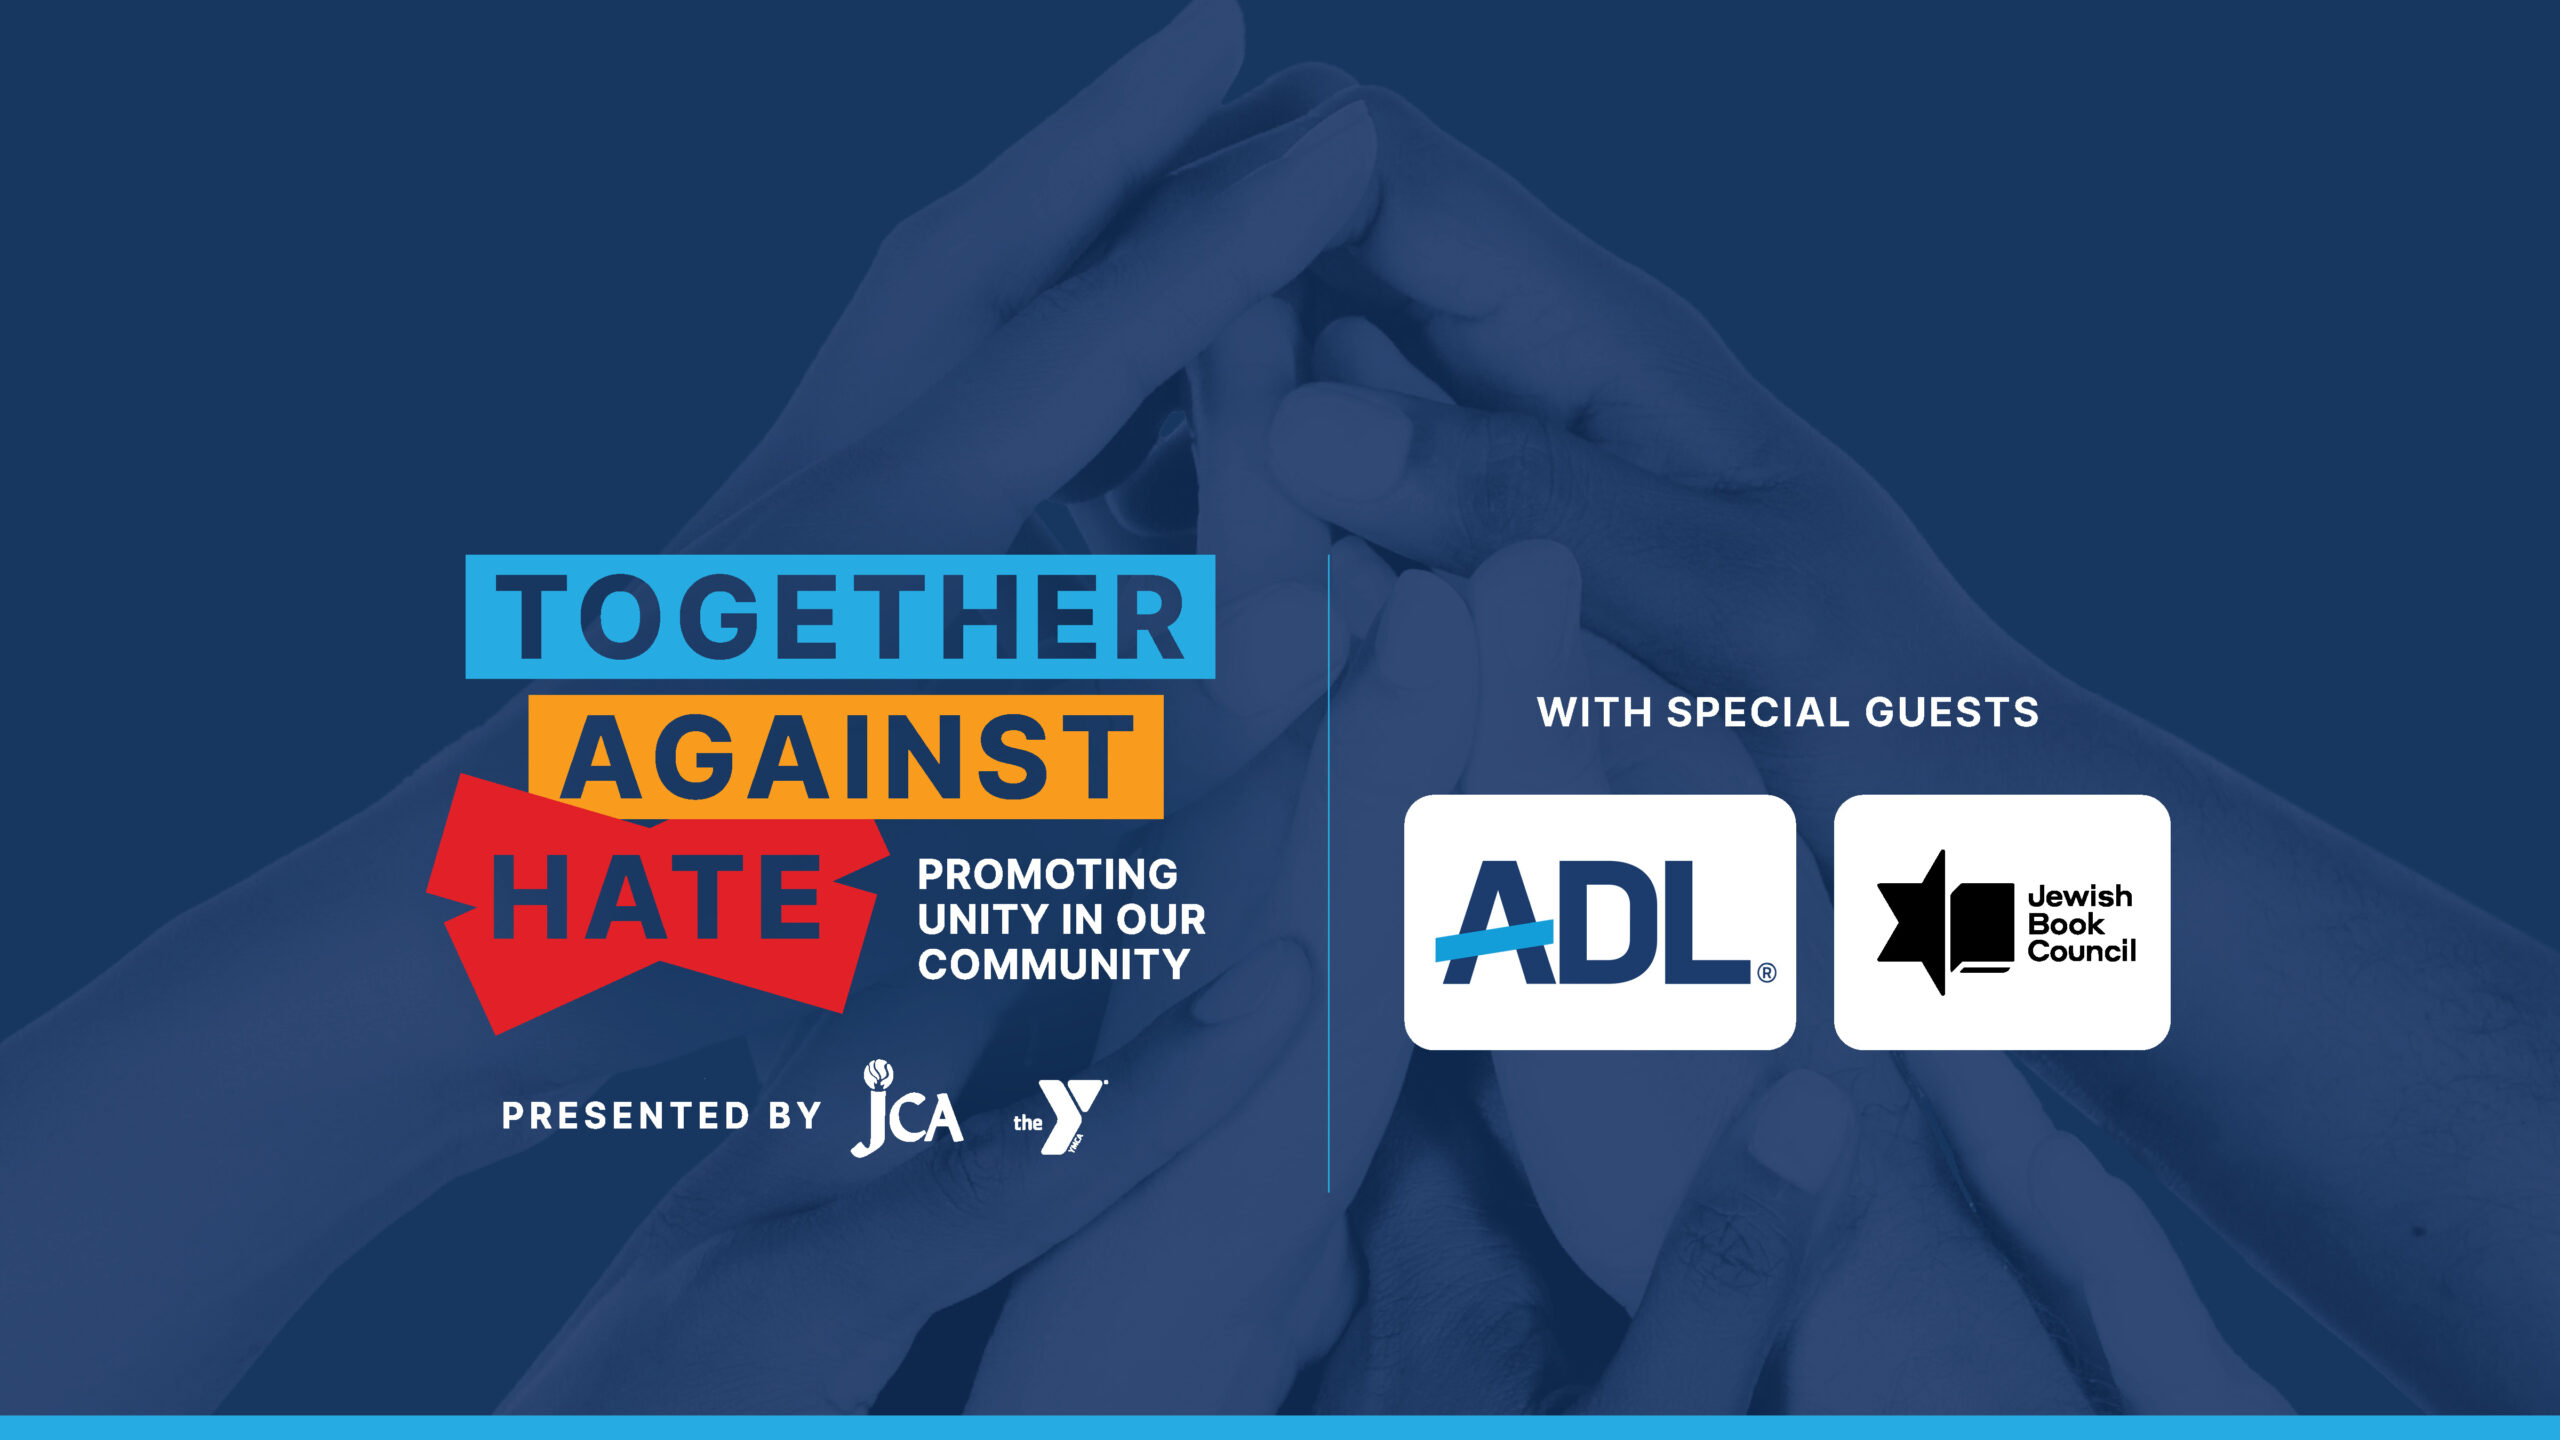 Together Against Hate Speaker Series with Special Guests ADL and JBC